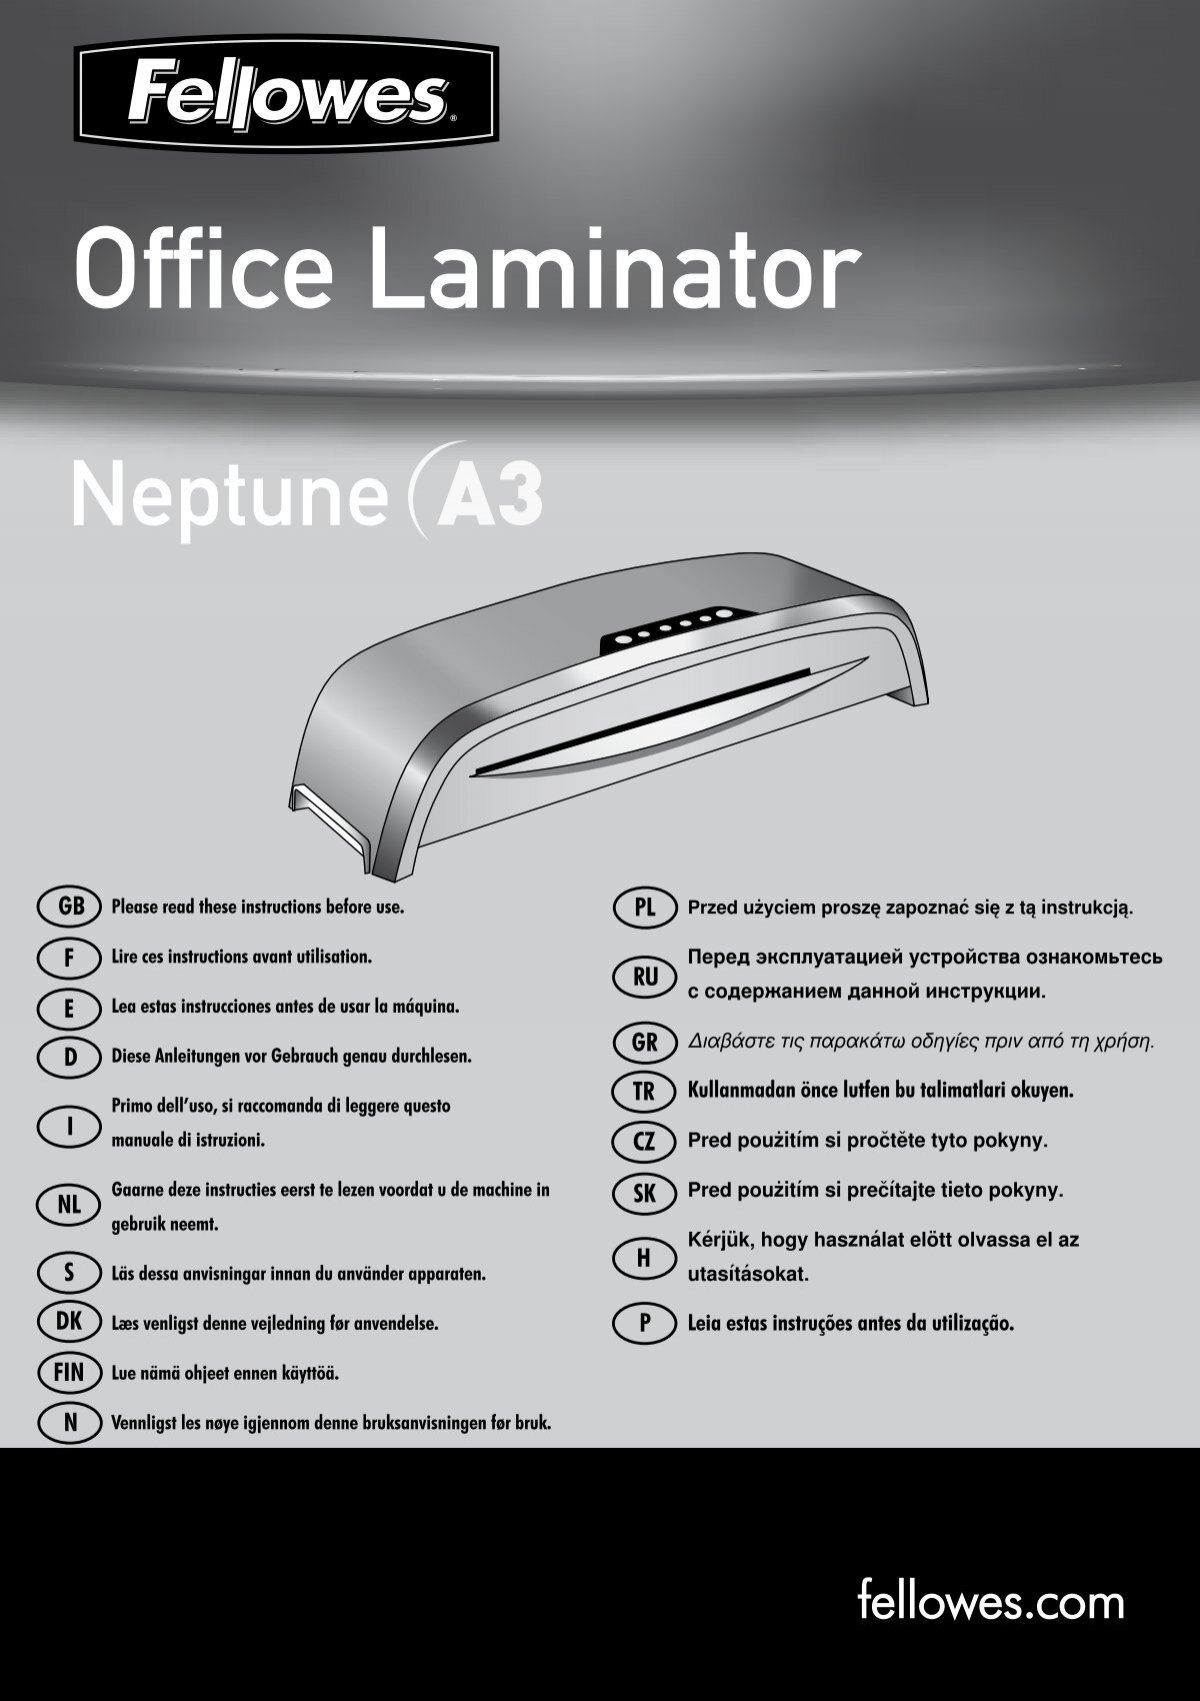 Plastifieuse usage fréquent Neptune 3 A3 FELLOWES